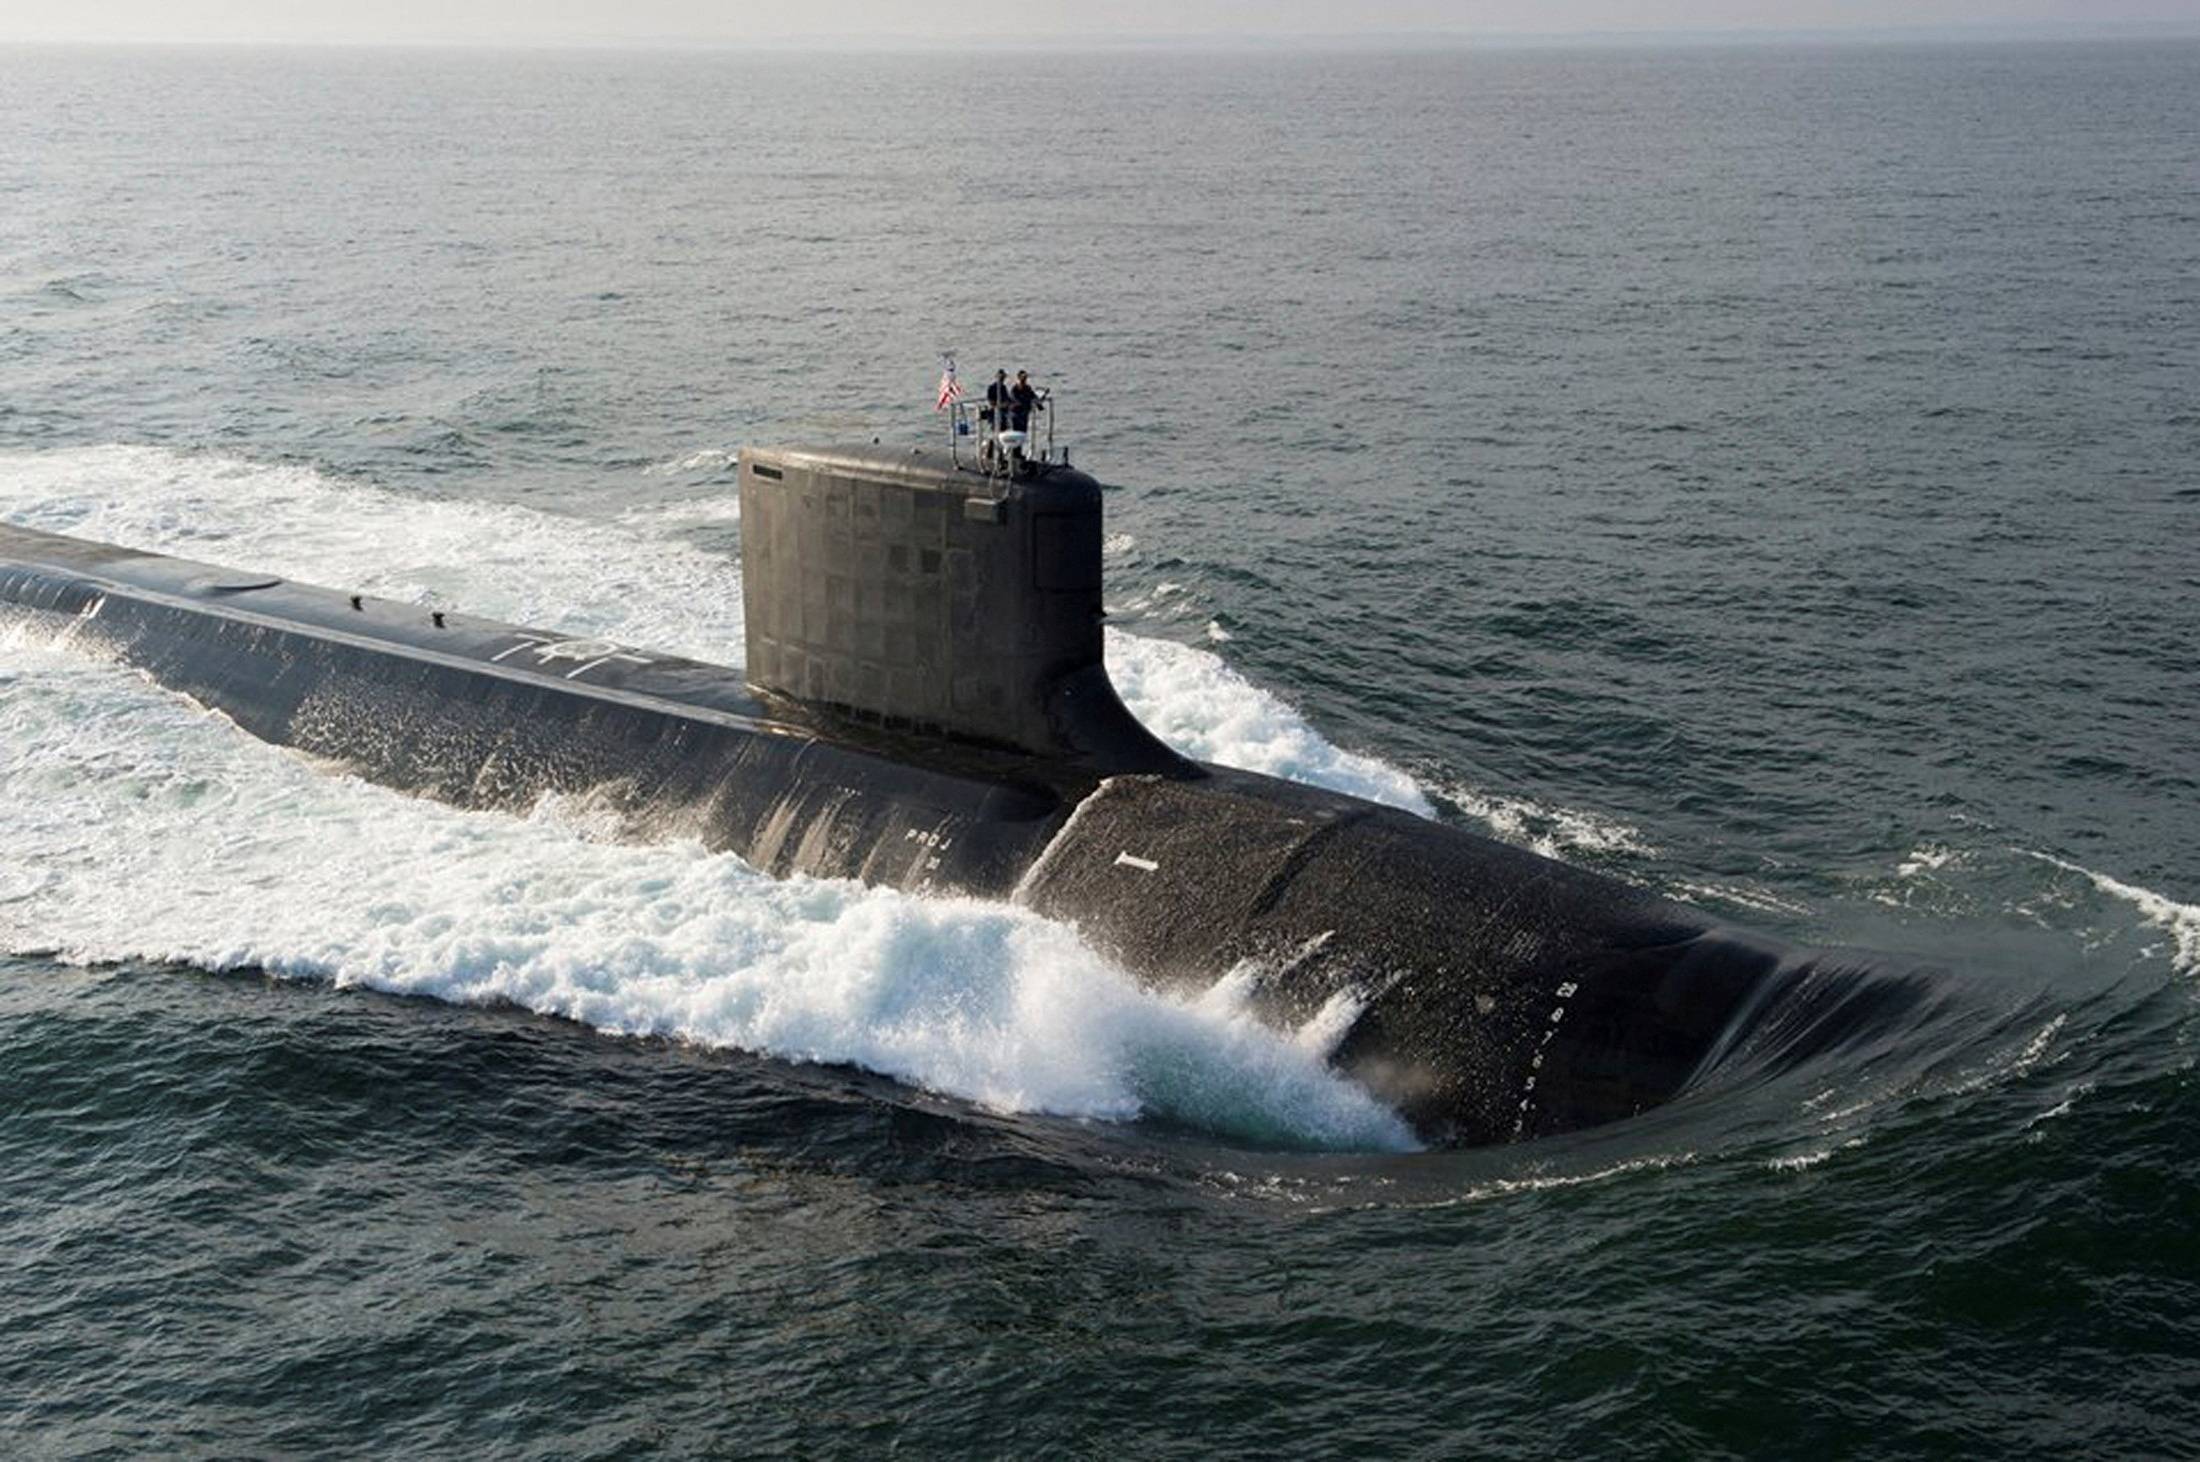 Australia Fast-Tracks Itself Into a Formidable Naval Power With Sub Deal